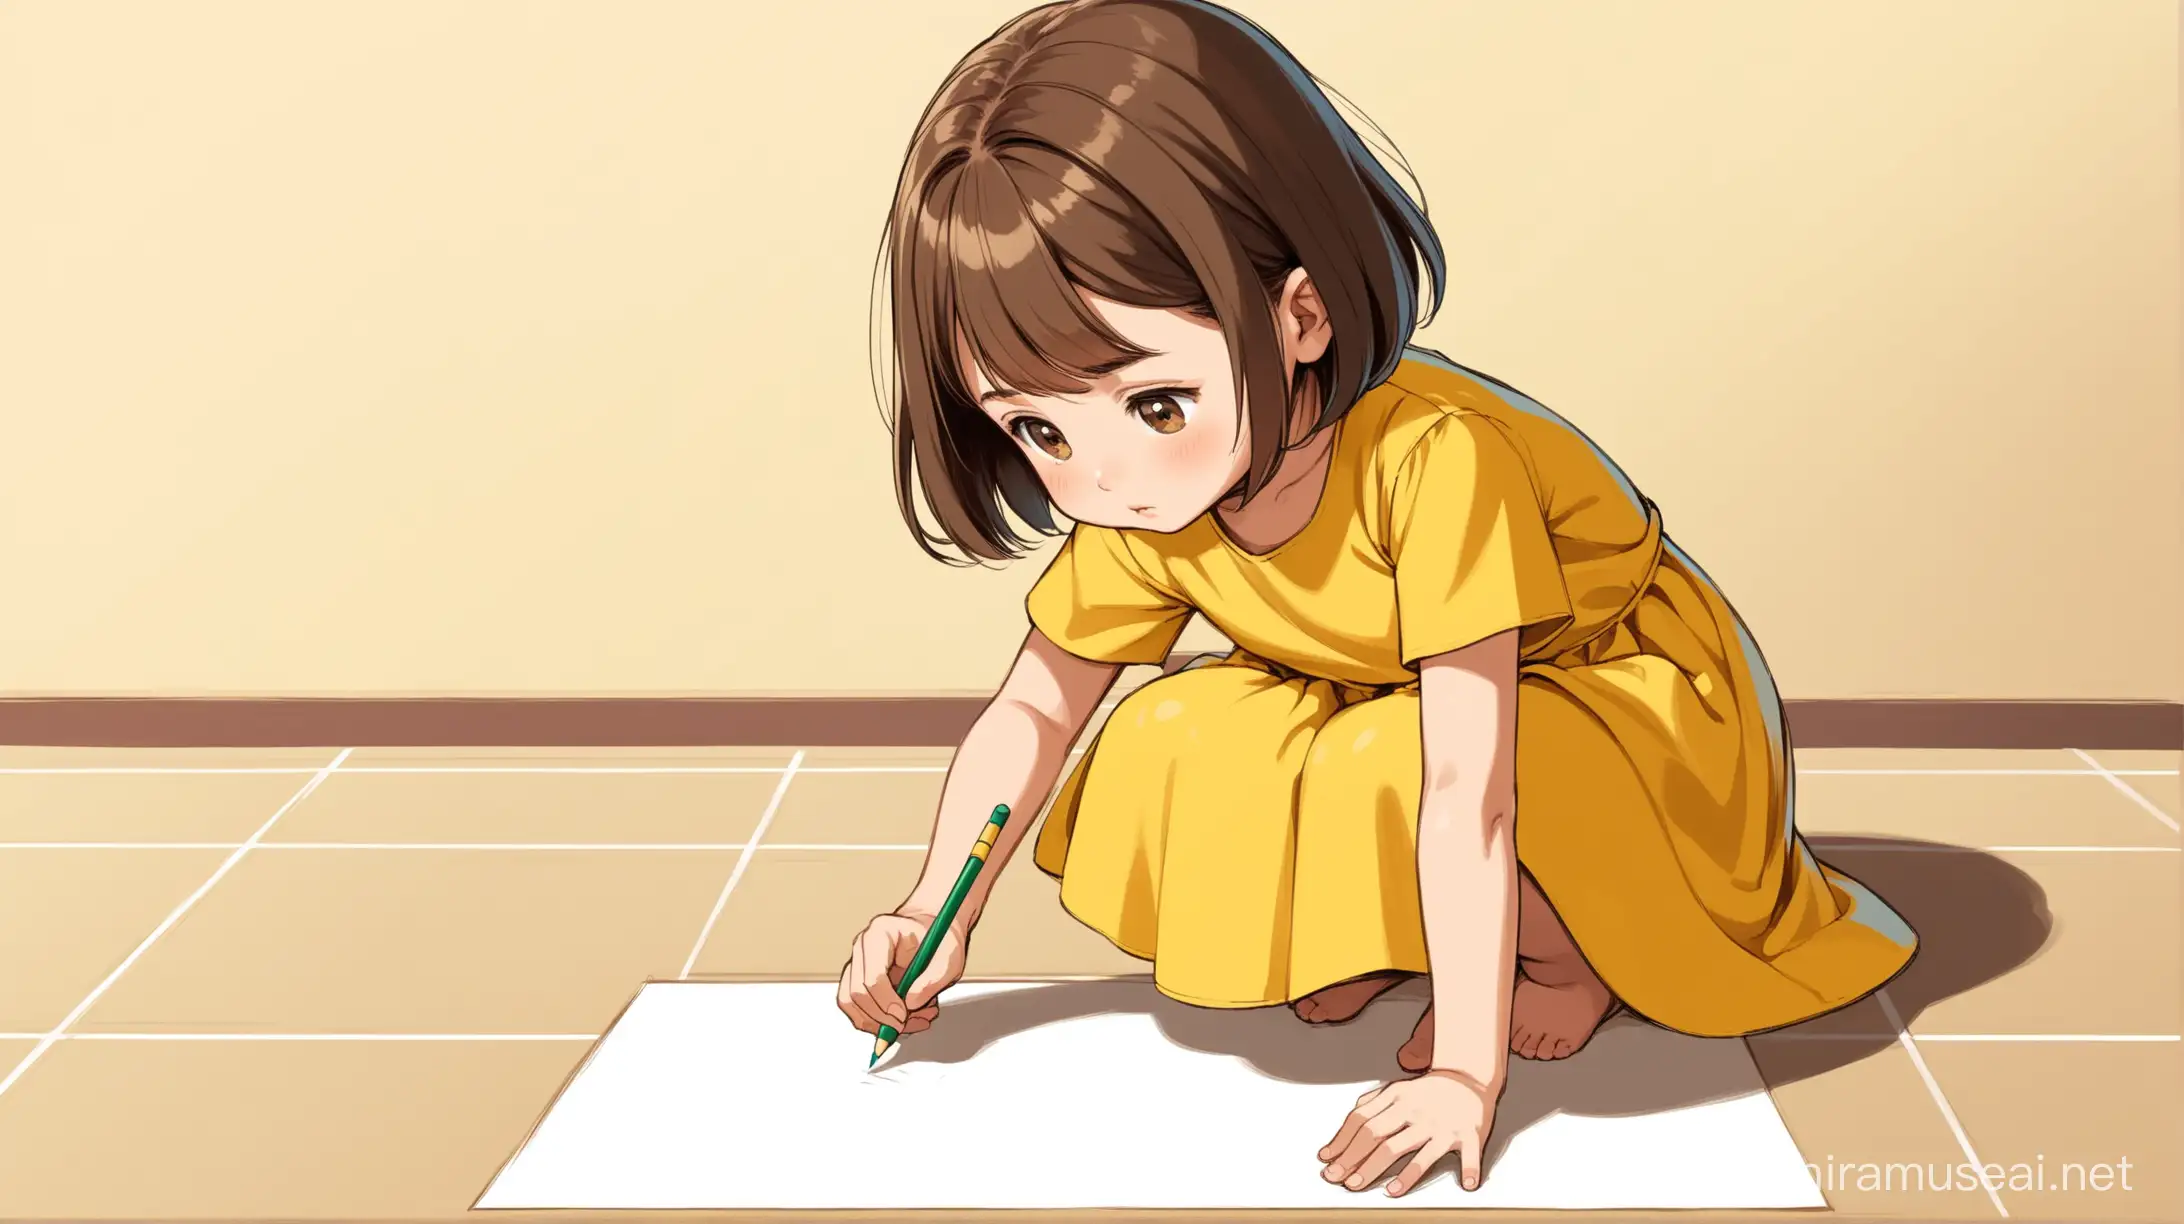 Young Girl Drawing on Floor in Yellow Dress Playful Cartoon Scene